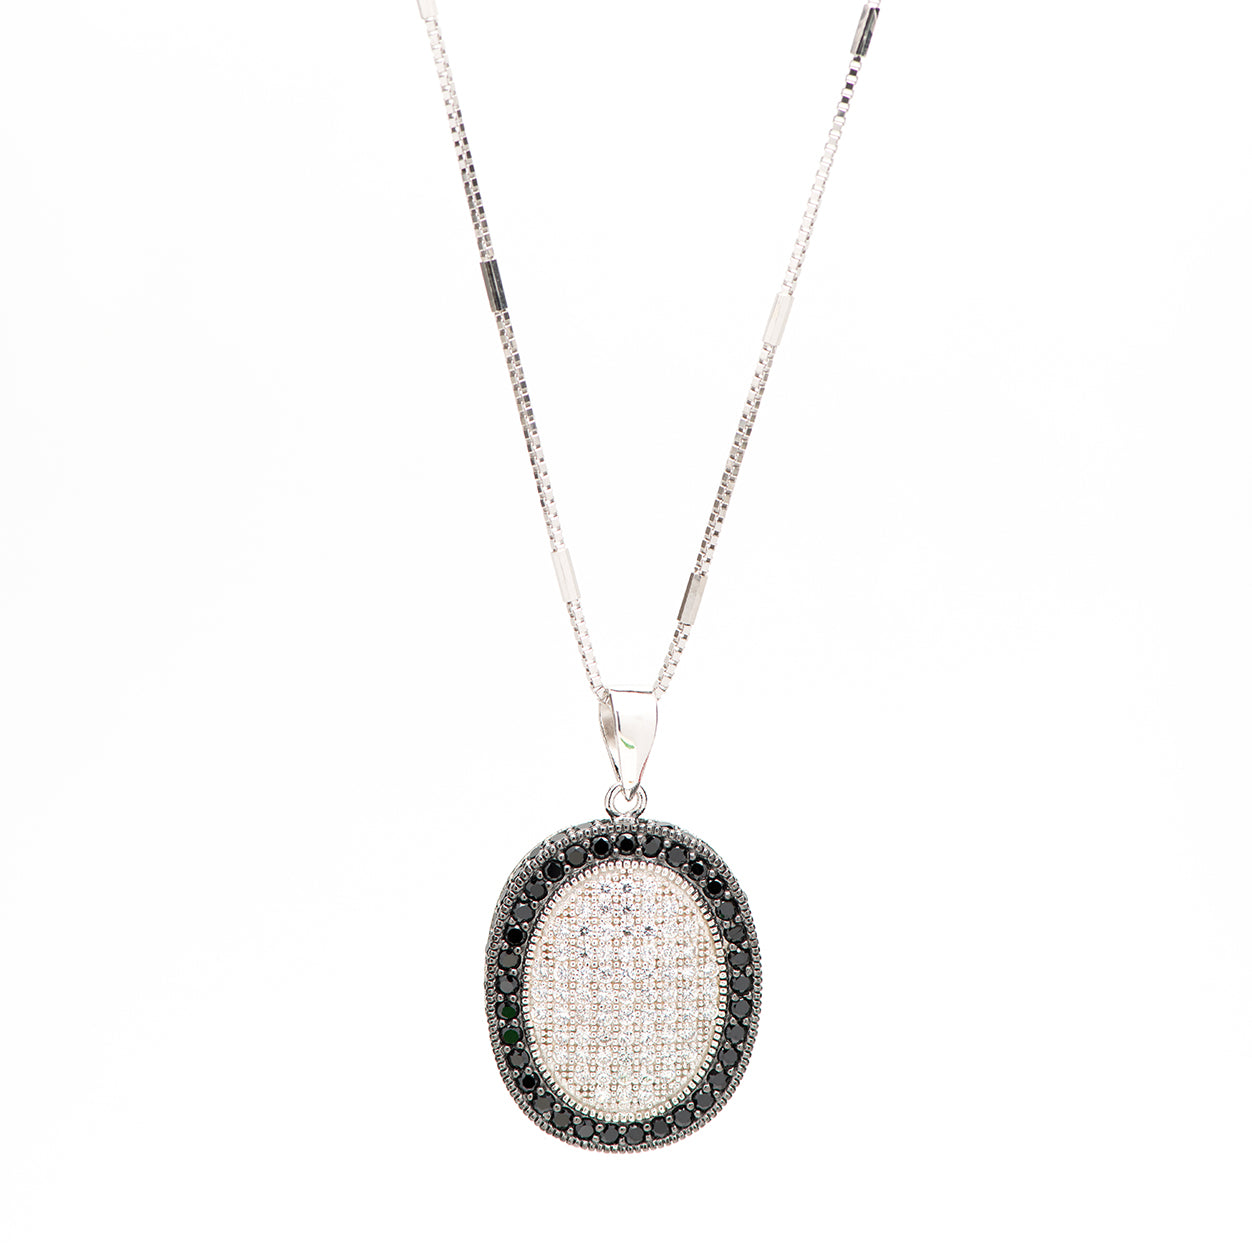 DK-925-463 sterling silver necklace with oval micropave CZ